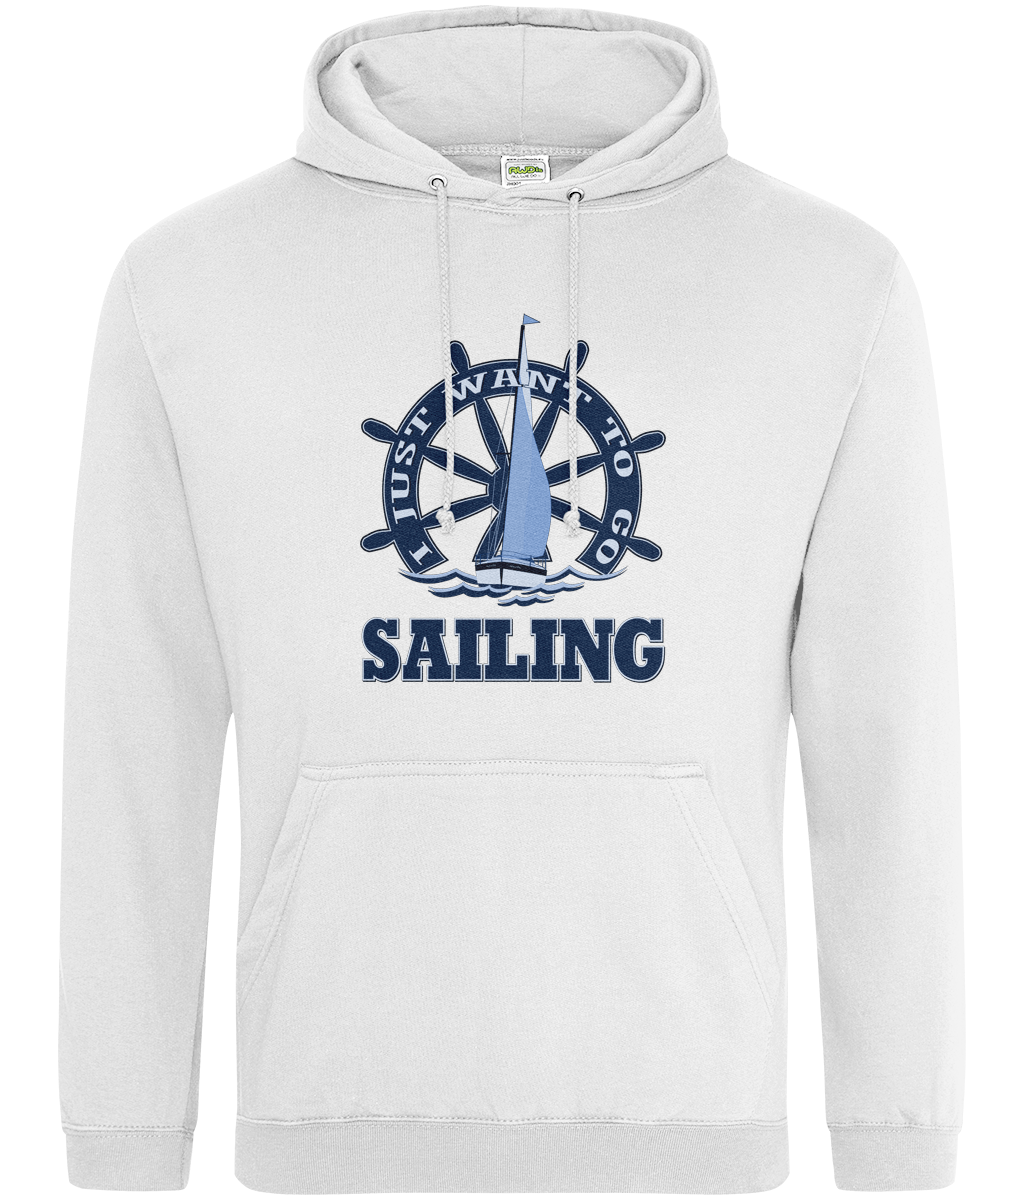 I Just Want to Go Sailing College Hoodie Arctic White